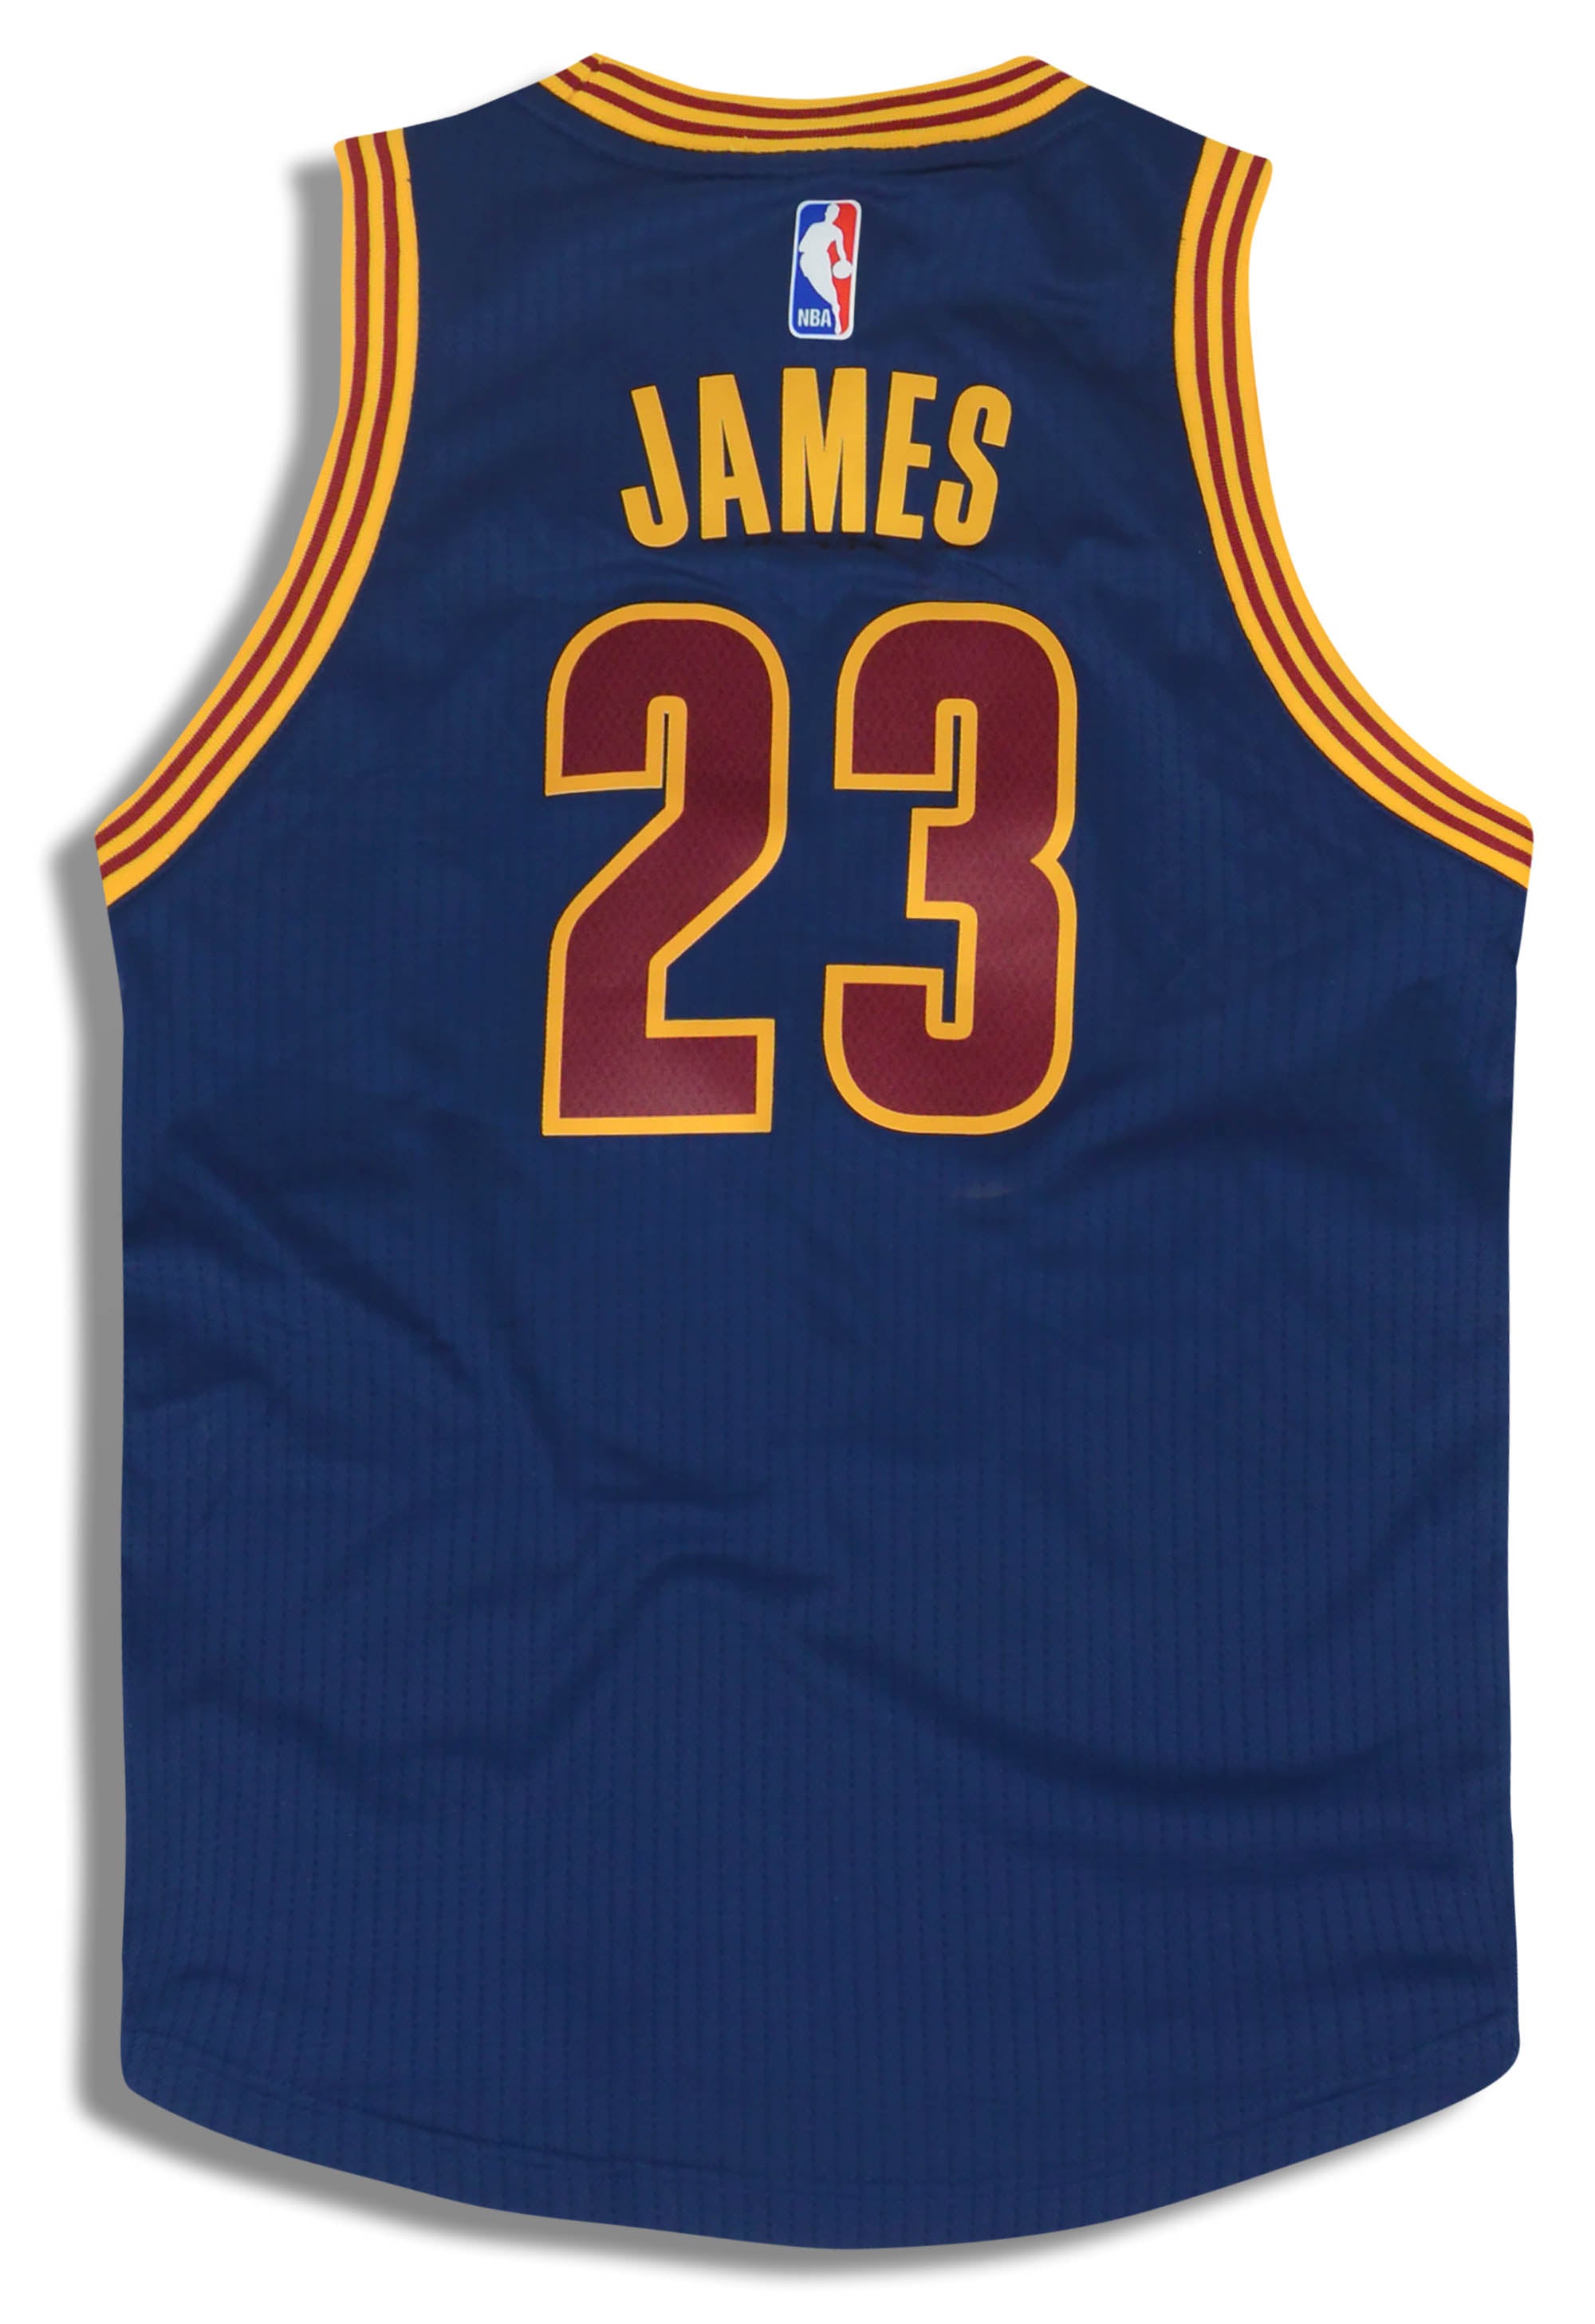 Cavs Throwback Paint Splash Jersey for Sale in Cleveland, OH